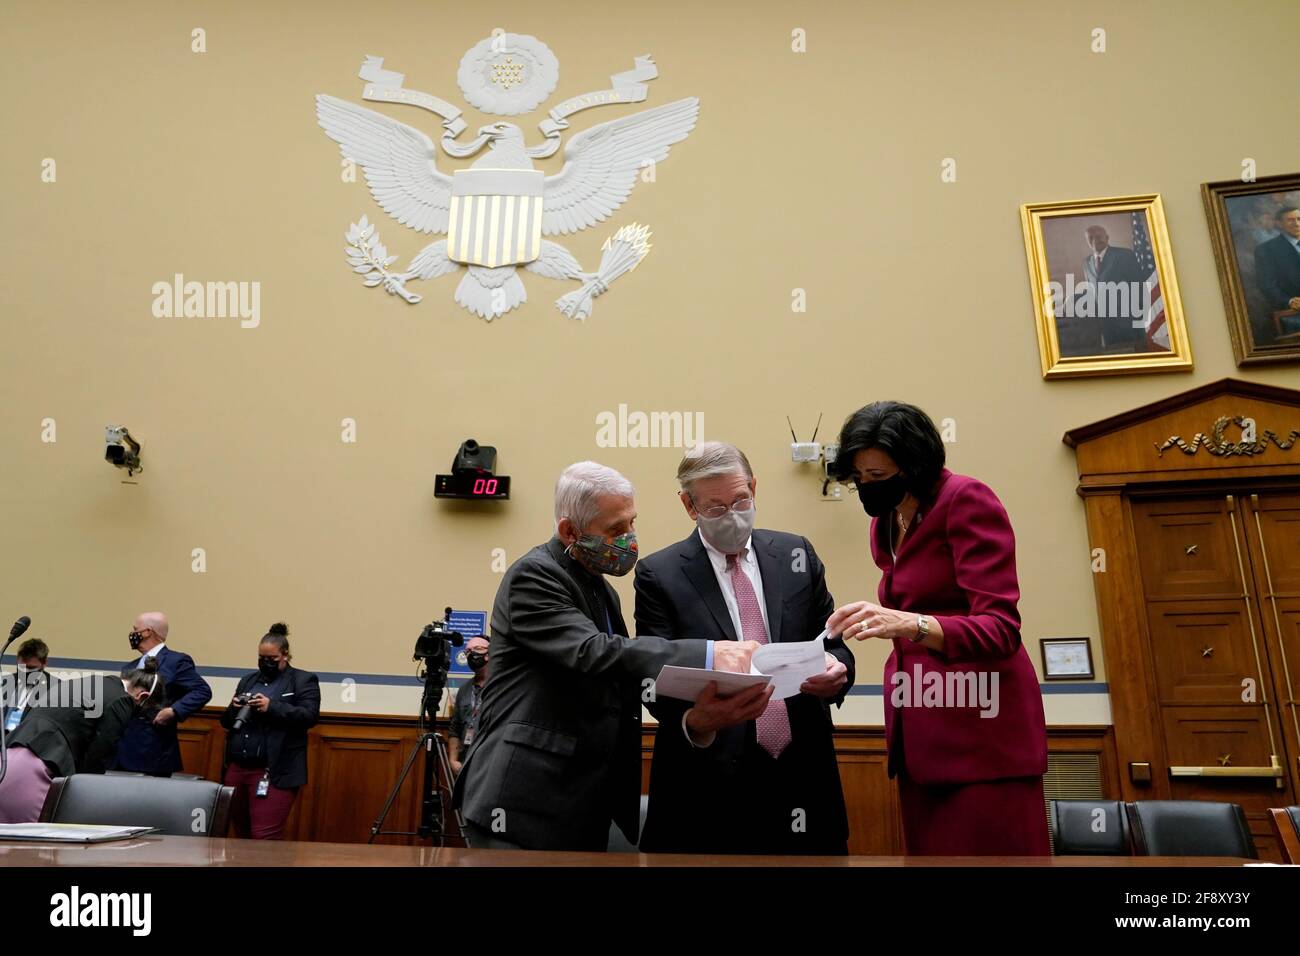 Washington, USA. 15th Apr, 2021. Dr. Anthony Fauci, Dr. David Kessler, and CDC Director Rochelle Walensky before the House Select Subcommittee on the Coronavirus Crisis holds a hearing on the Capitol Hill in Washington, on Thursday, April 15, 2021. (Photo by Amr Alfiky/Pool/Sipa USA) Credit: Sipa USA/Alamy Live News Stock Photo